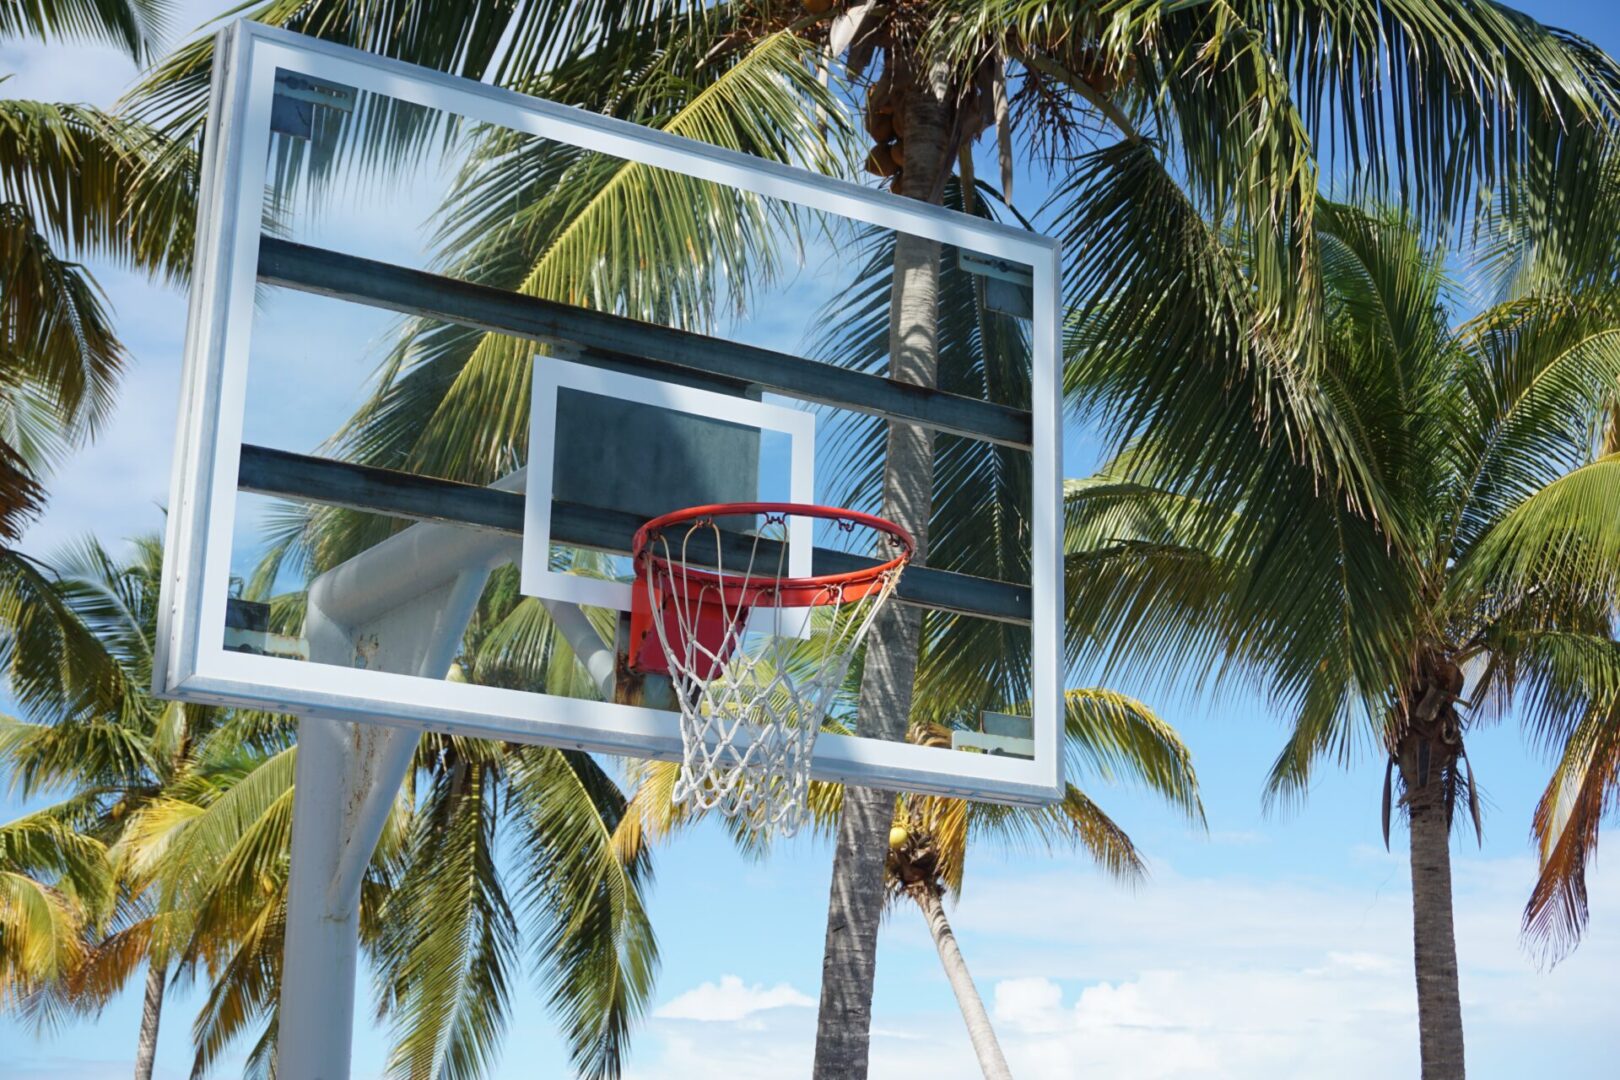 A basketball hoop in the middle of a palm tree.